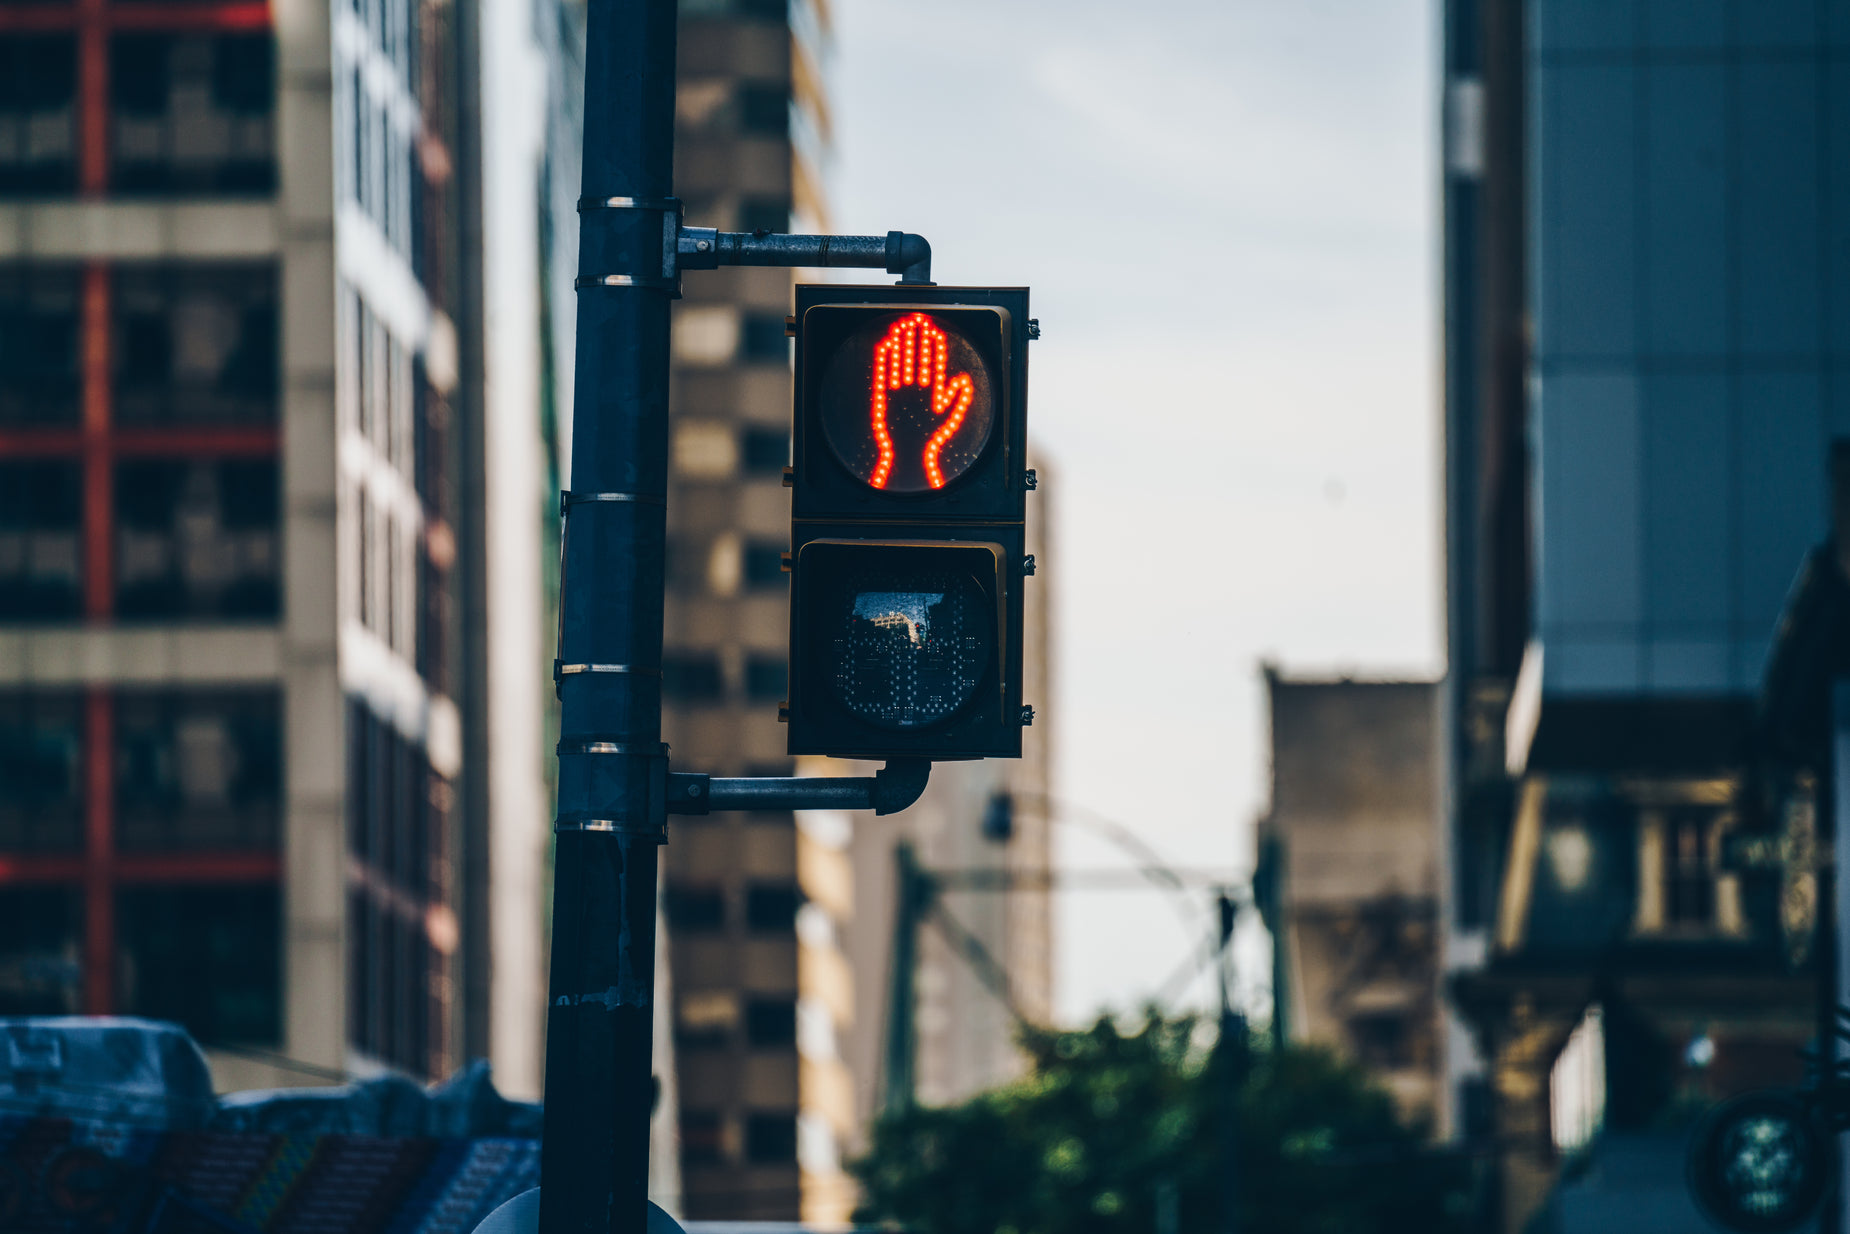 a traffic light displaying red on a busy city street